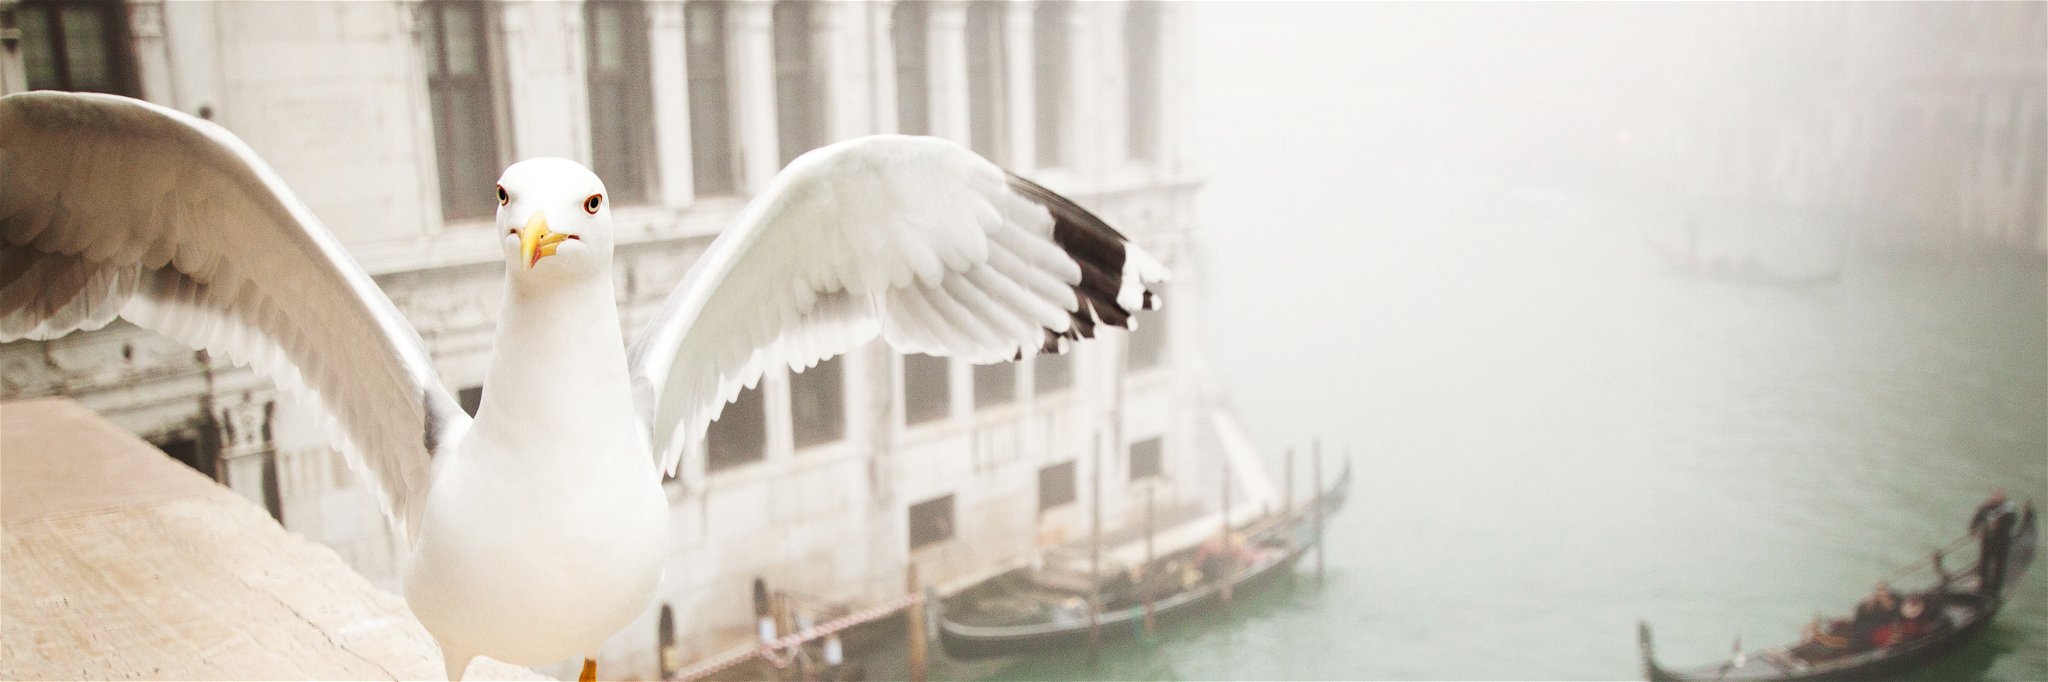 Attacks by seagulls have become endemic in Venice.